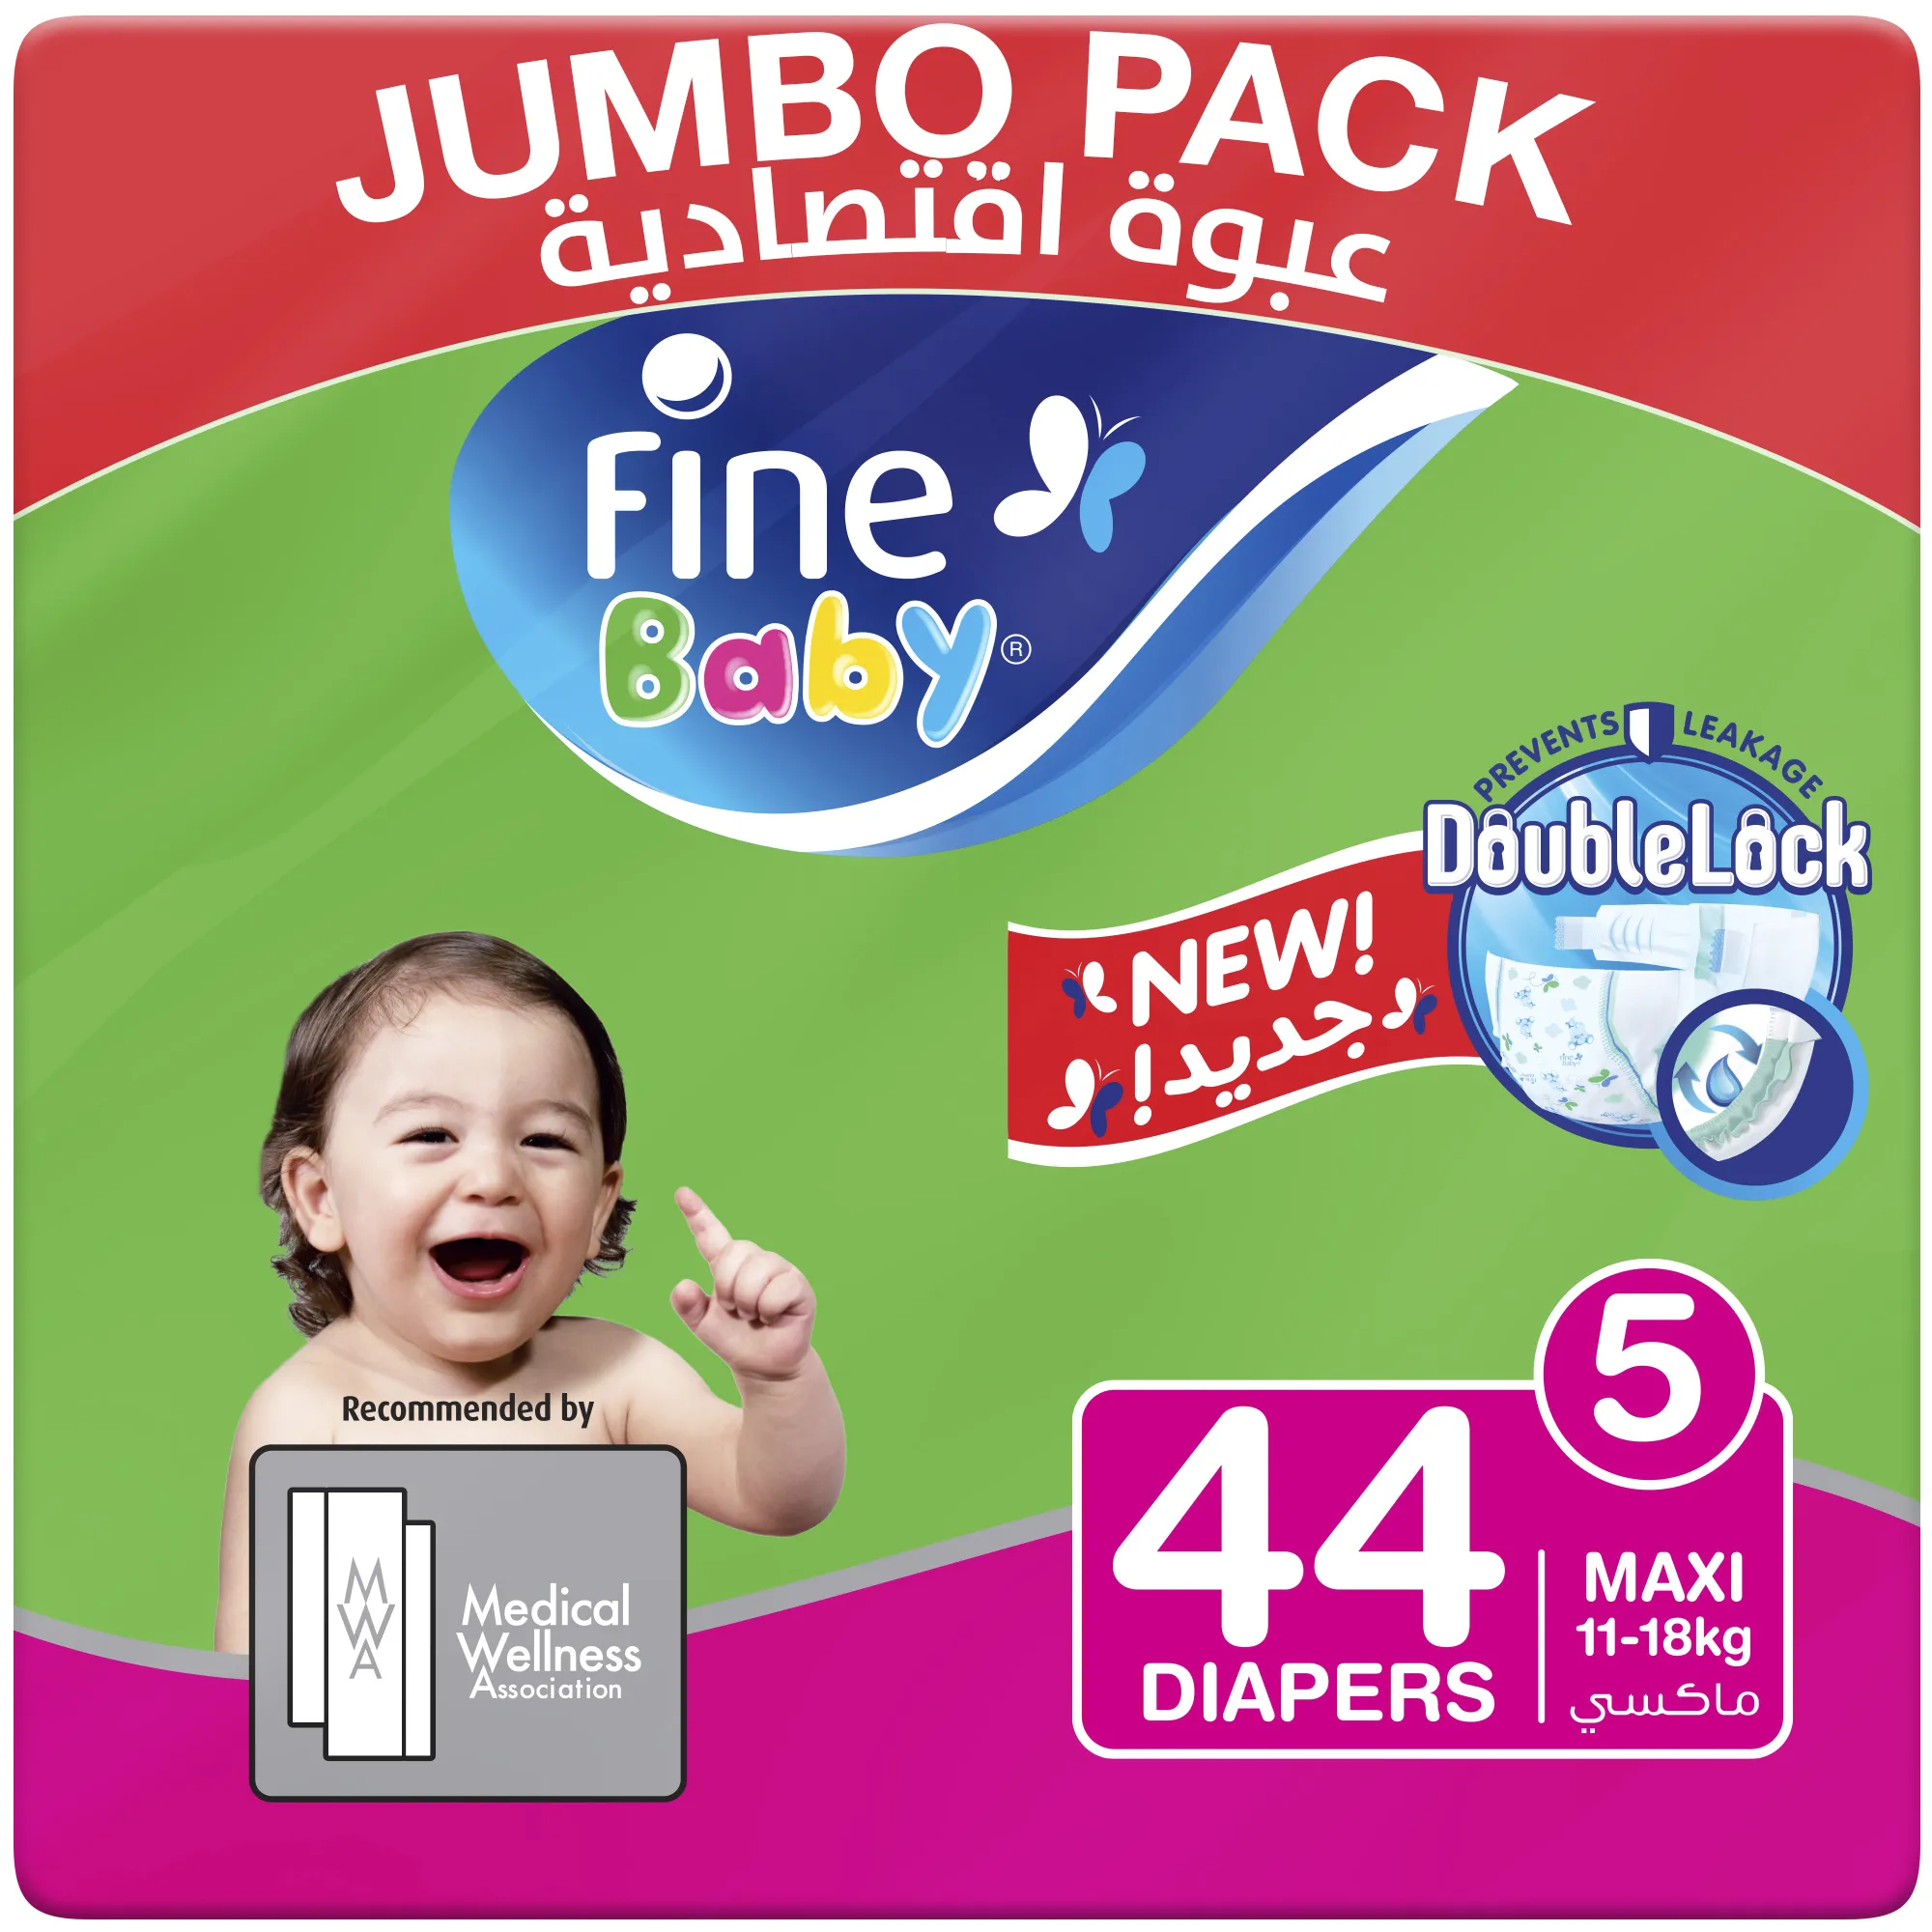 Fine Baby Diapers, Size 5, Maxi 11 18kg, Jumbo Pack of 44 diapers